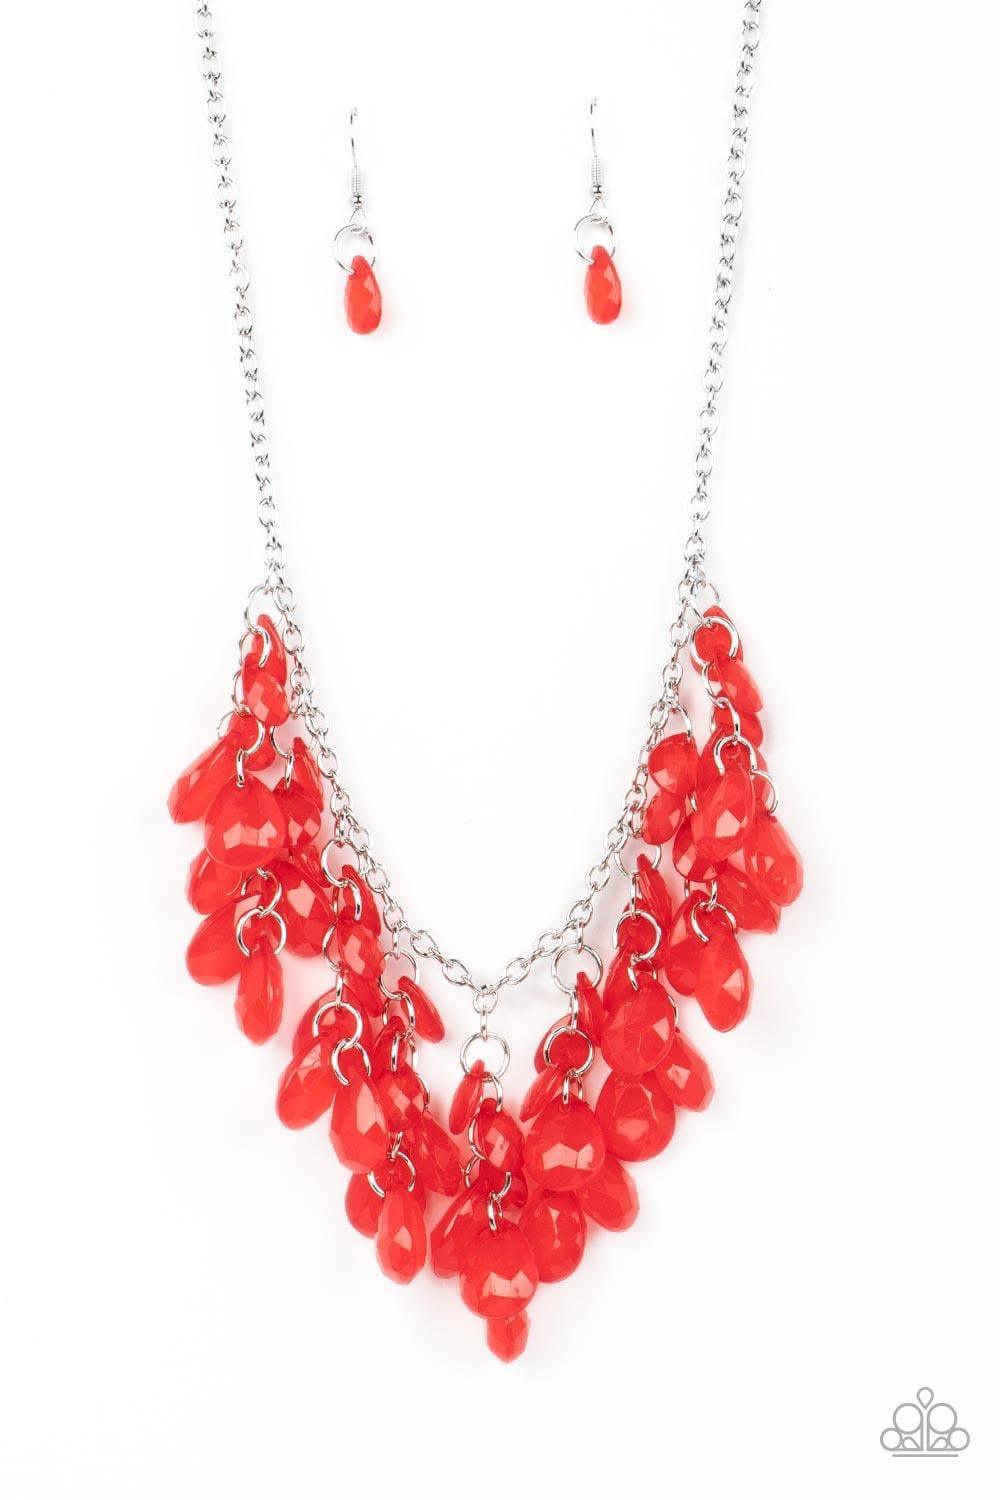 Paparazzi Accessories - Crystal Cabaret - Red Necklace - Bling by JessieK